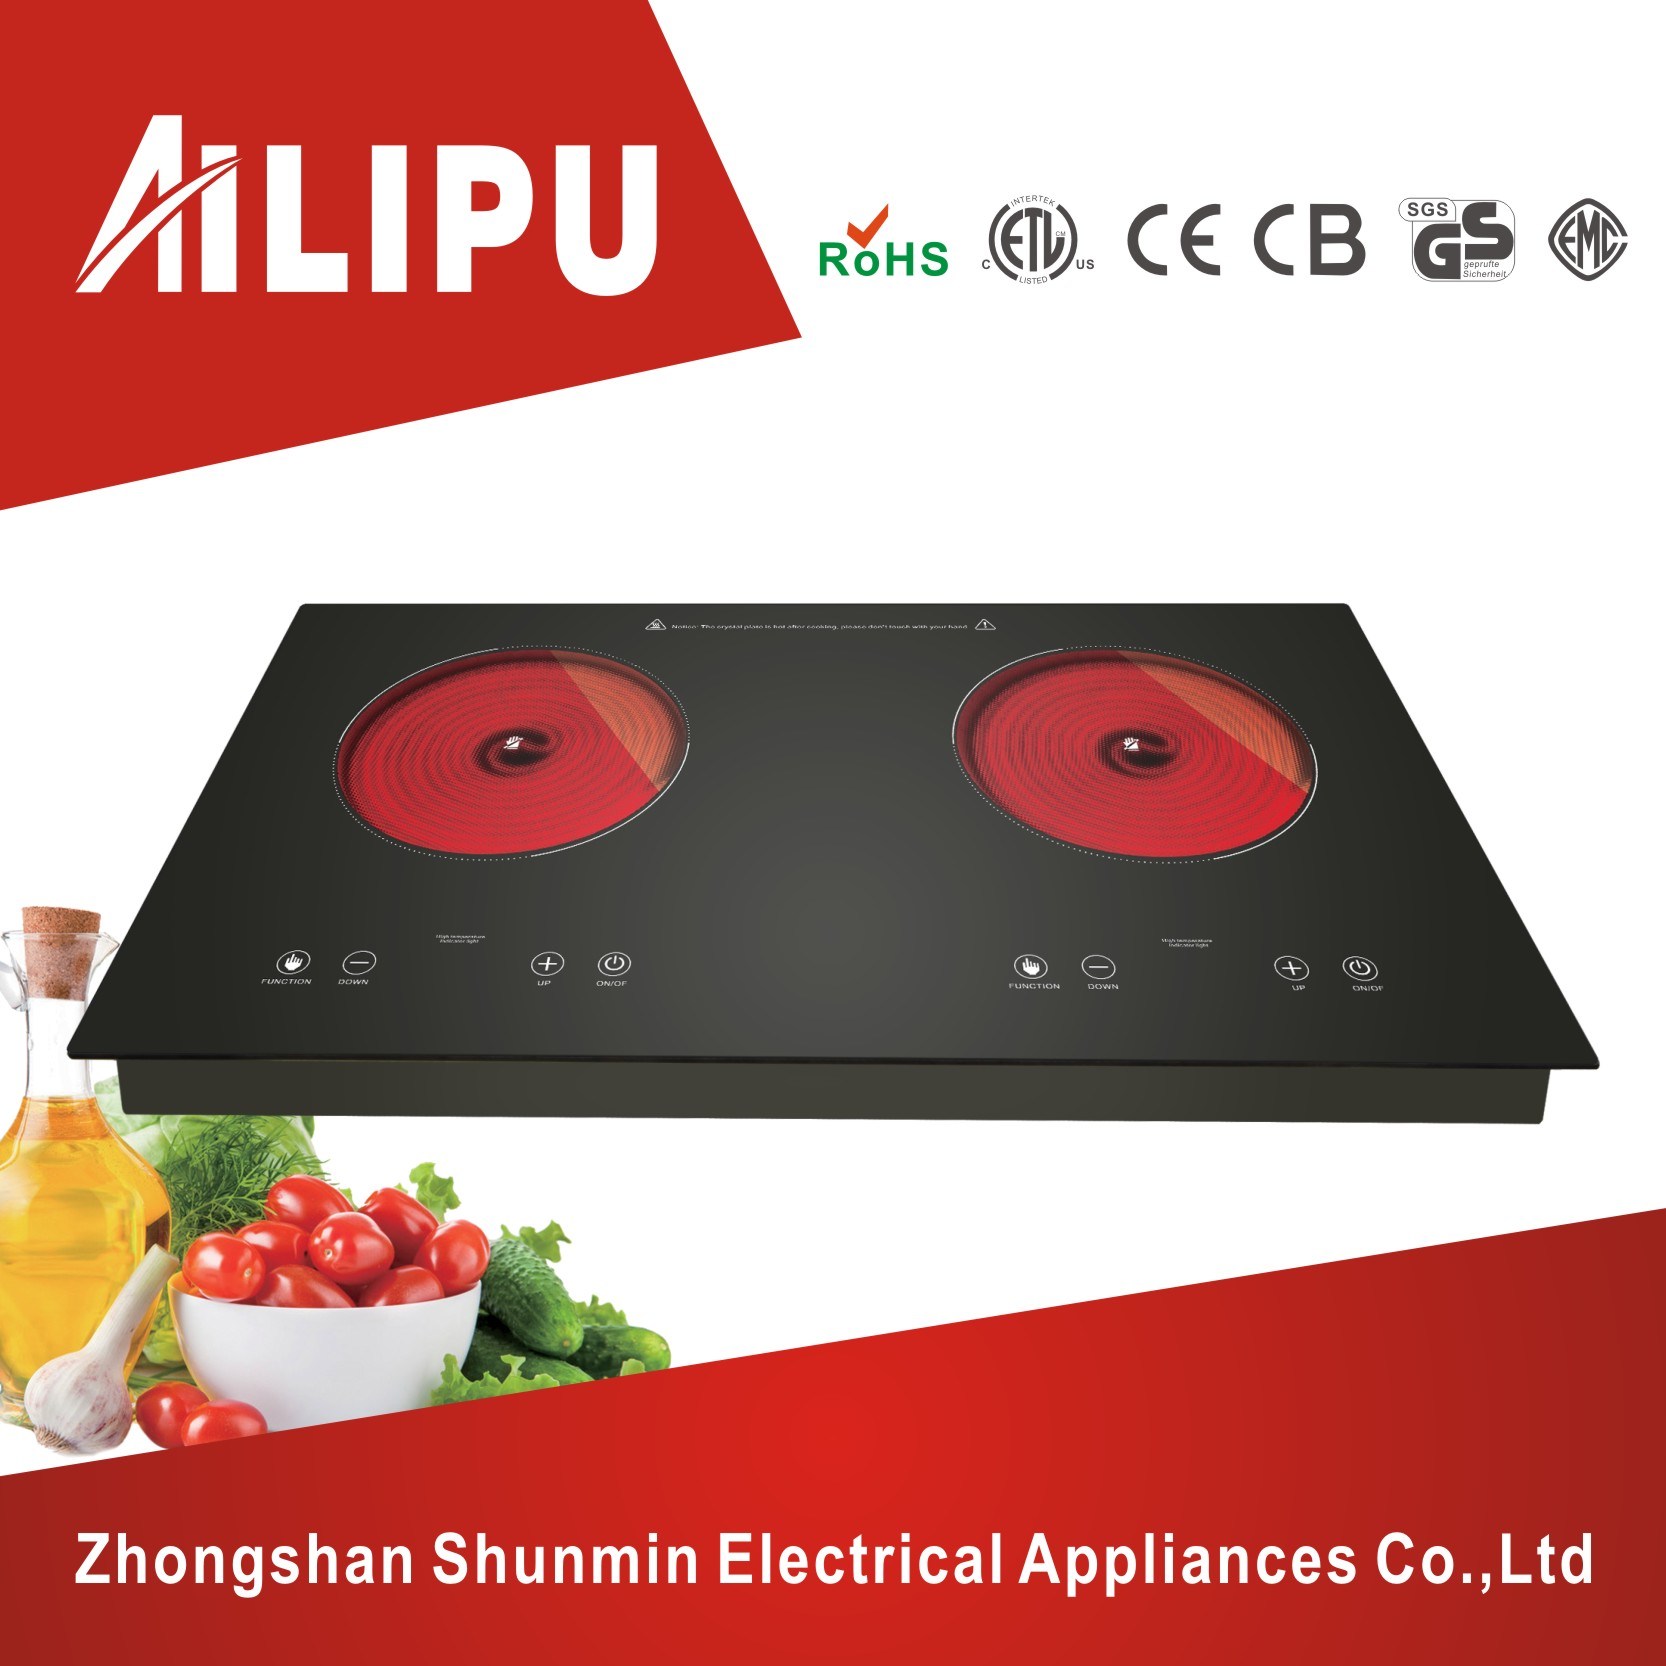 Hot-Selling Dual Plate Infared Cooktop/Double Hotplates/Infared Ceramic Hob/Electrical Cooker